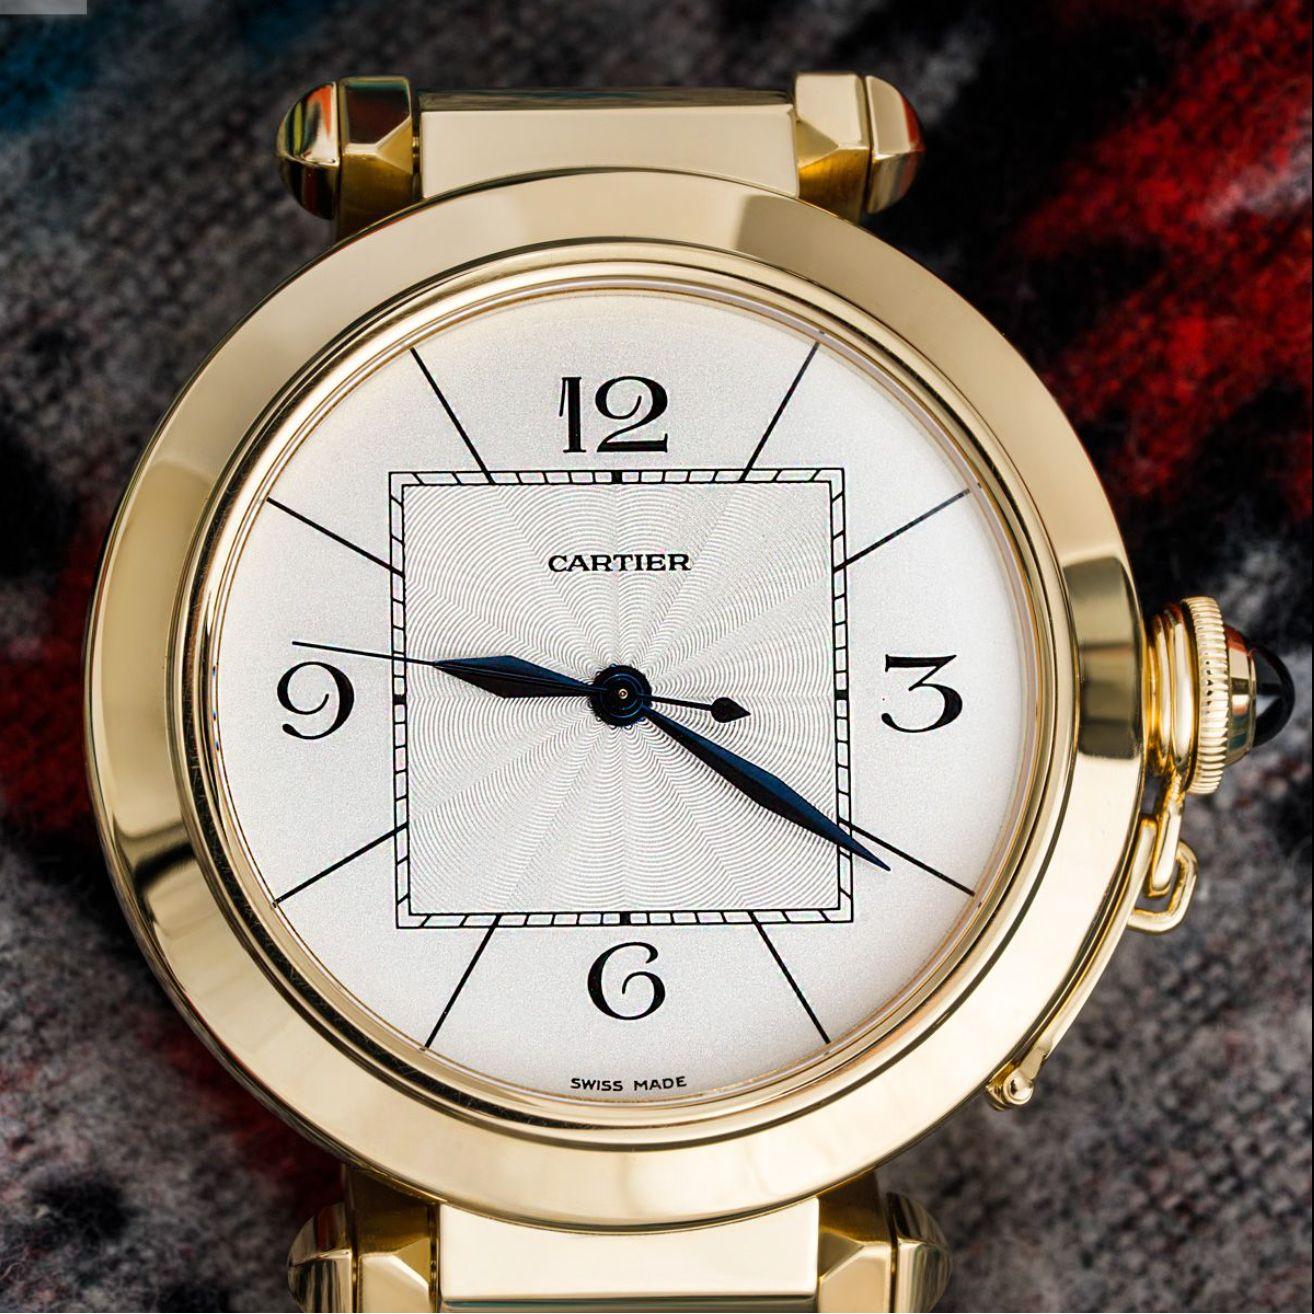 A 42mm Pasha in yellow gold by Cartier. Featuring a silver dial with a guilloche centre, sword-shaped hands in blued steel, a yellow bezel and a screw-down cover set with a cabochon.

The bracelet comes with a concealed double deployant clasp, both